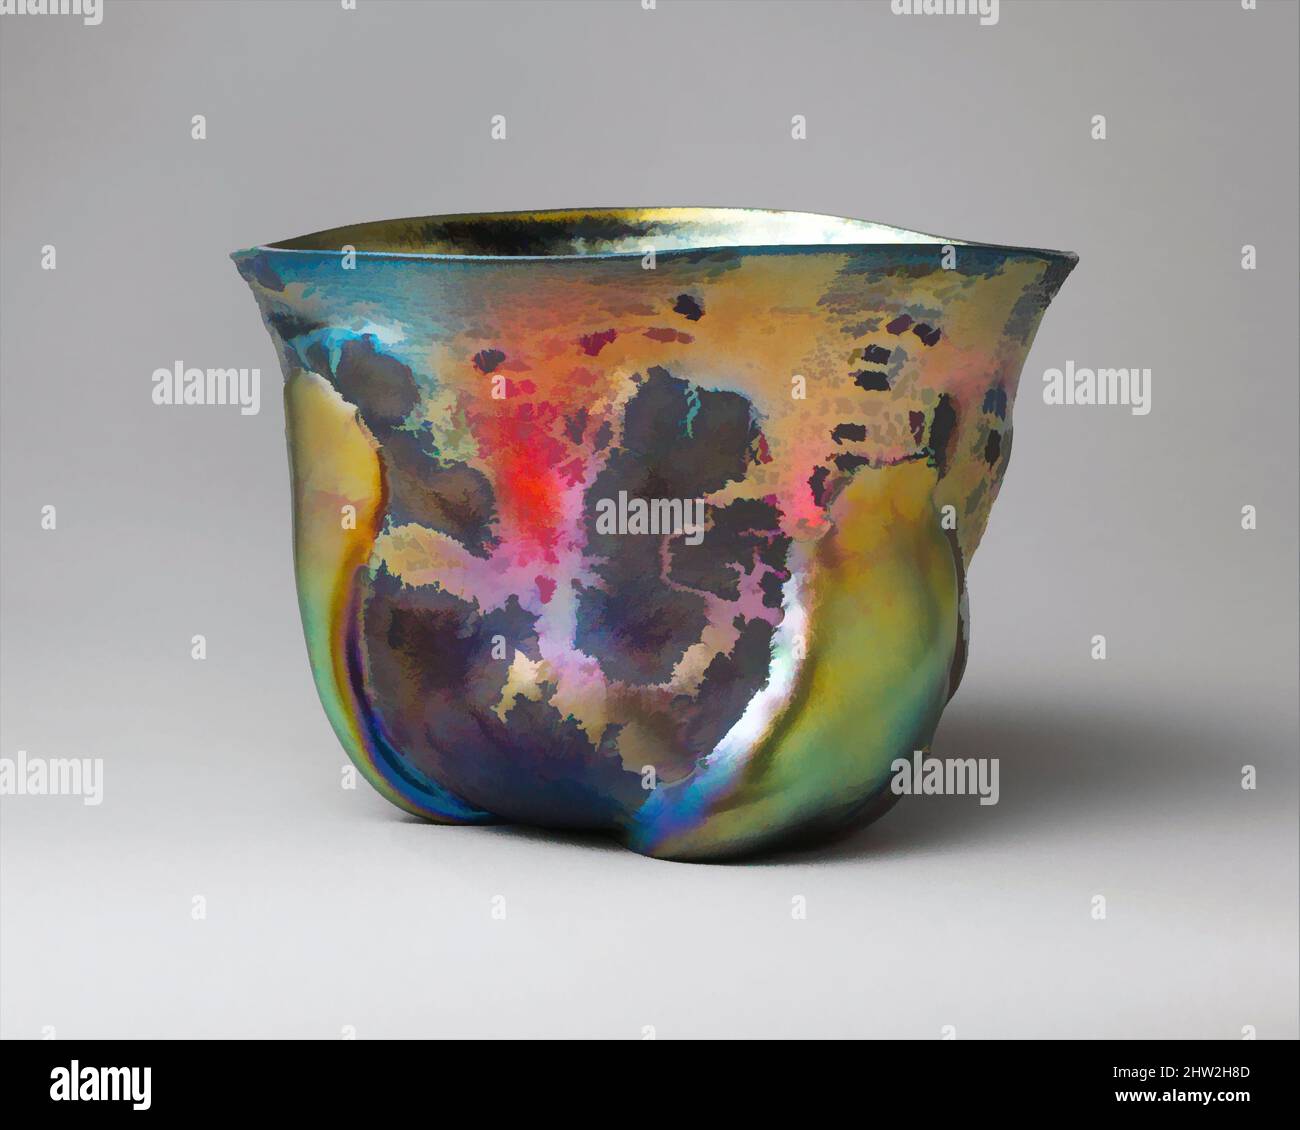 Art inspired by Bowl, ca. 1908, Made in New York, New York, United States, American, Favrile glass, H. 6 5/16 in. (16 cm), Glass, Tiffany Furnaces, Classic works modernized by Artotop with a splash of modernity. Shapes, color and value, eye-catching visual impact on art. Emotions through freedom of artworks in a contemporary way. A timeless message pursuing a wildly creative new direction. Artists turning to the digital medium and creating the Artotop NFT Stock Photo